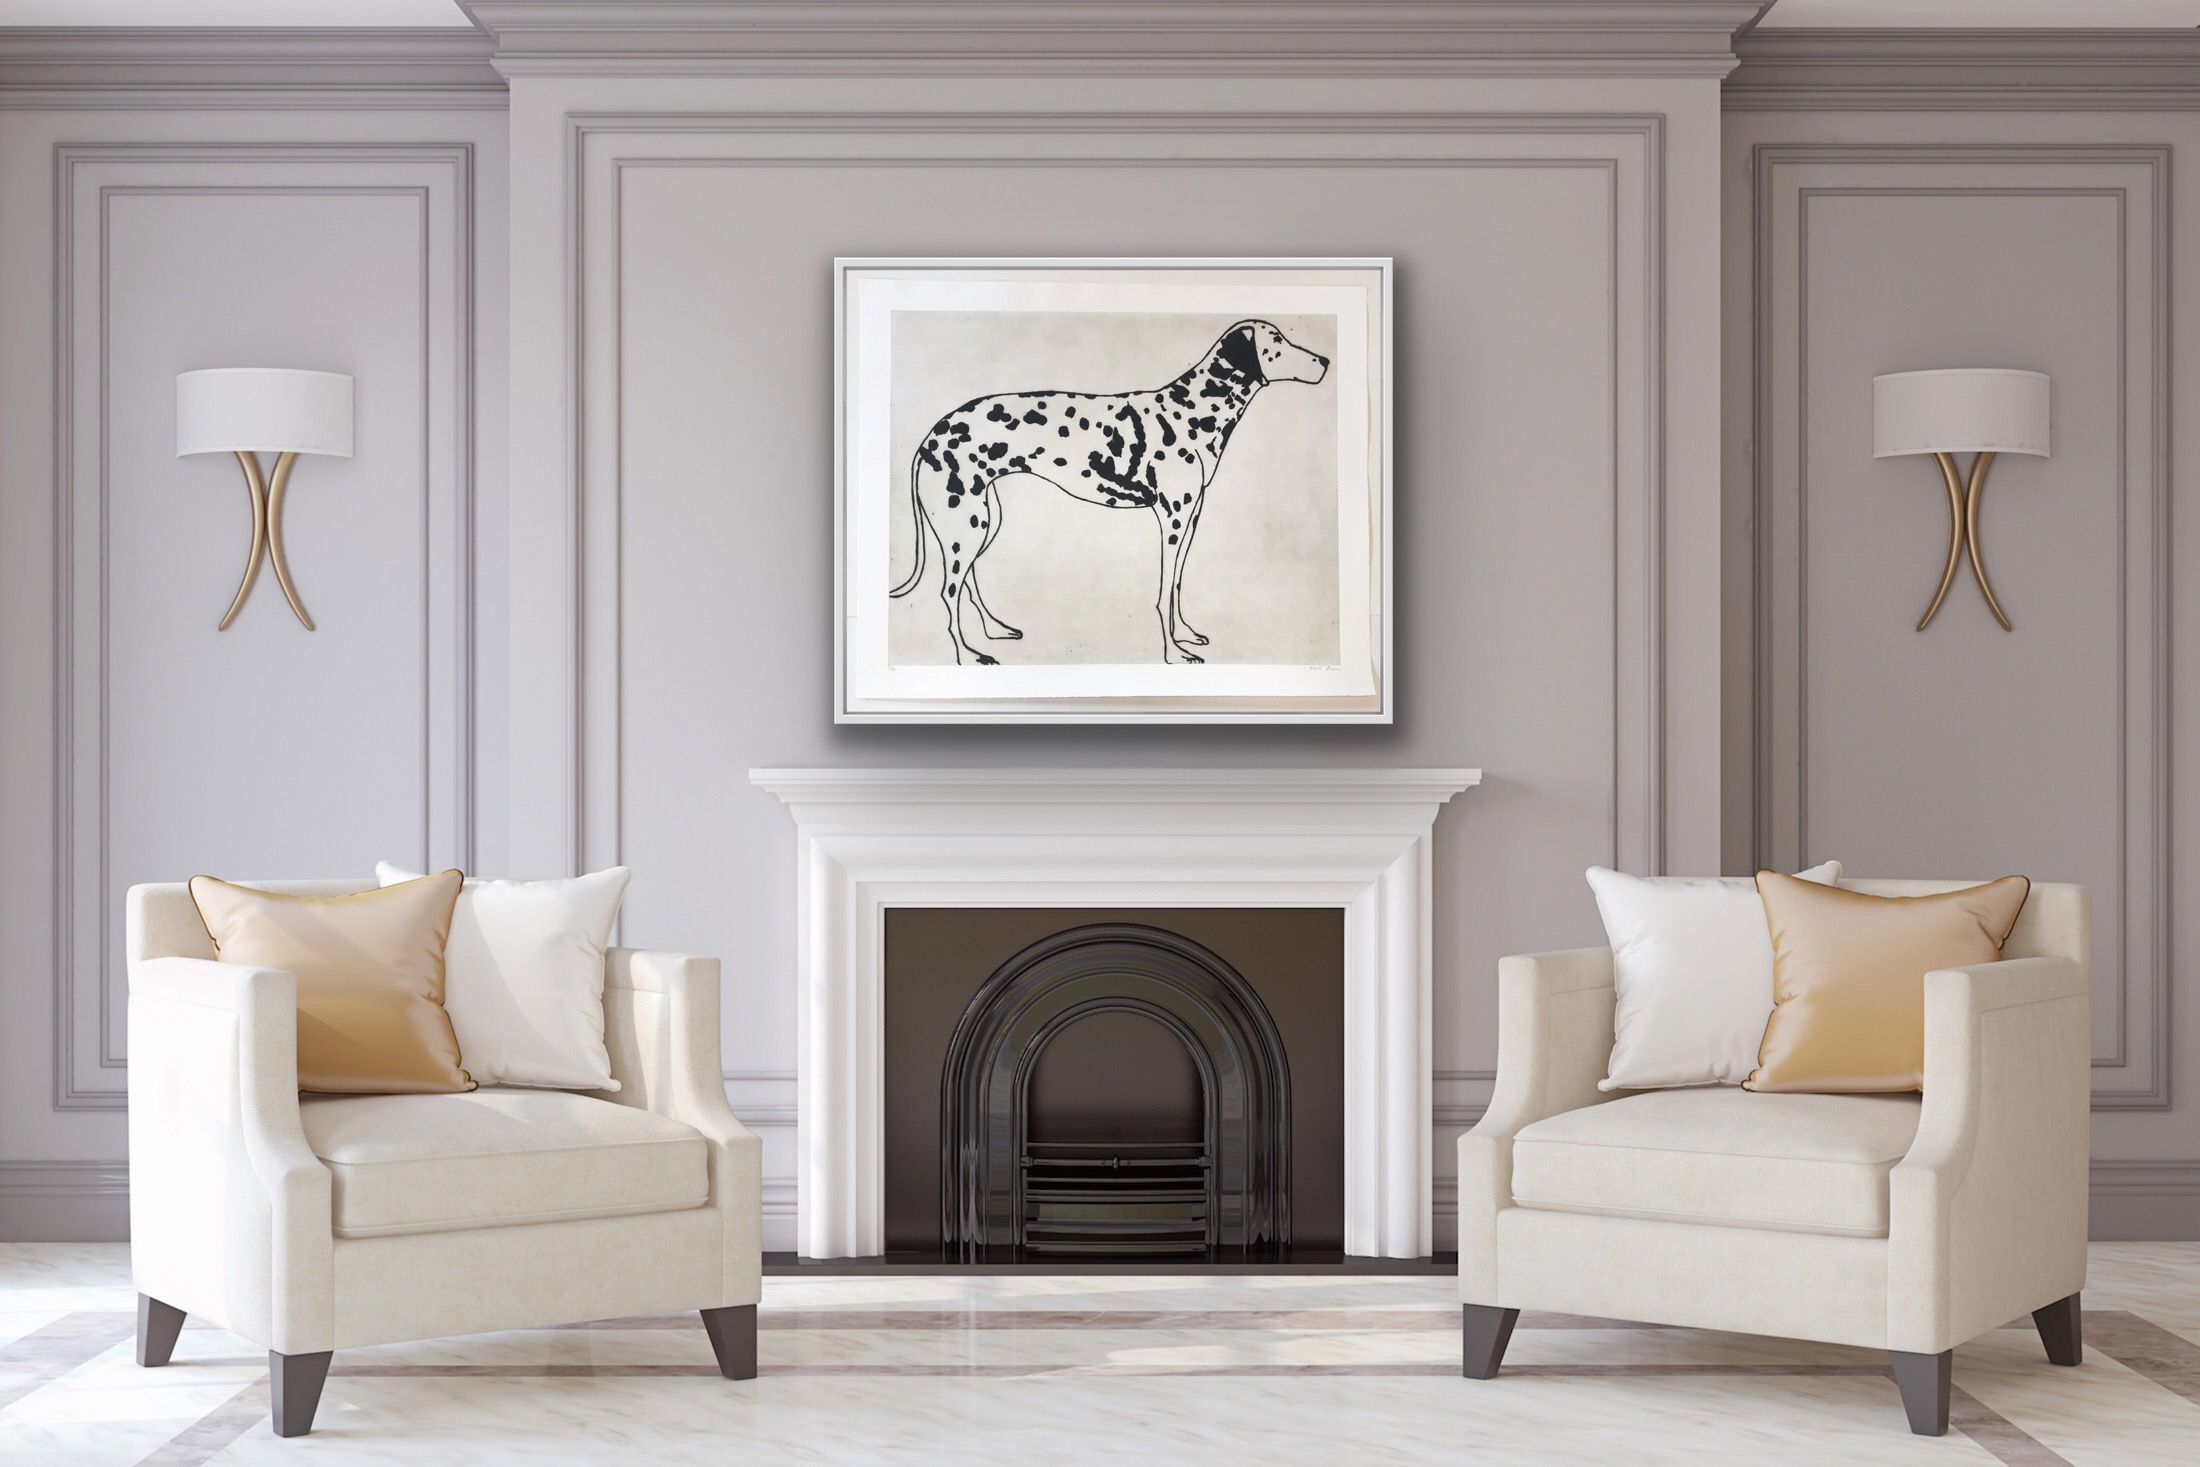 Dalmatian by Kate Boxer - Secondary Image